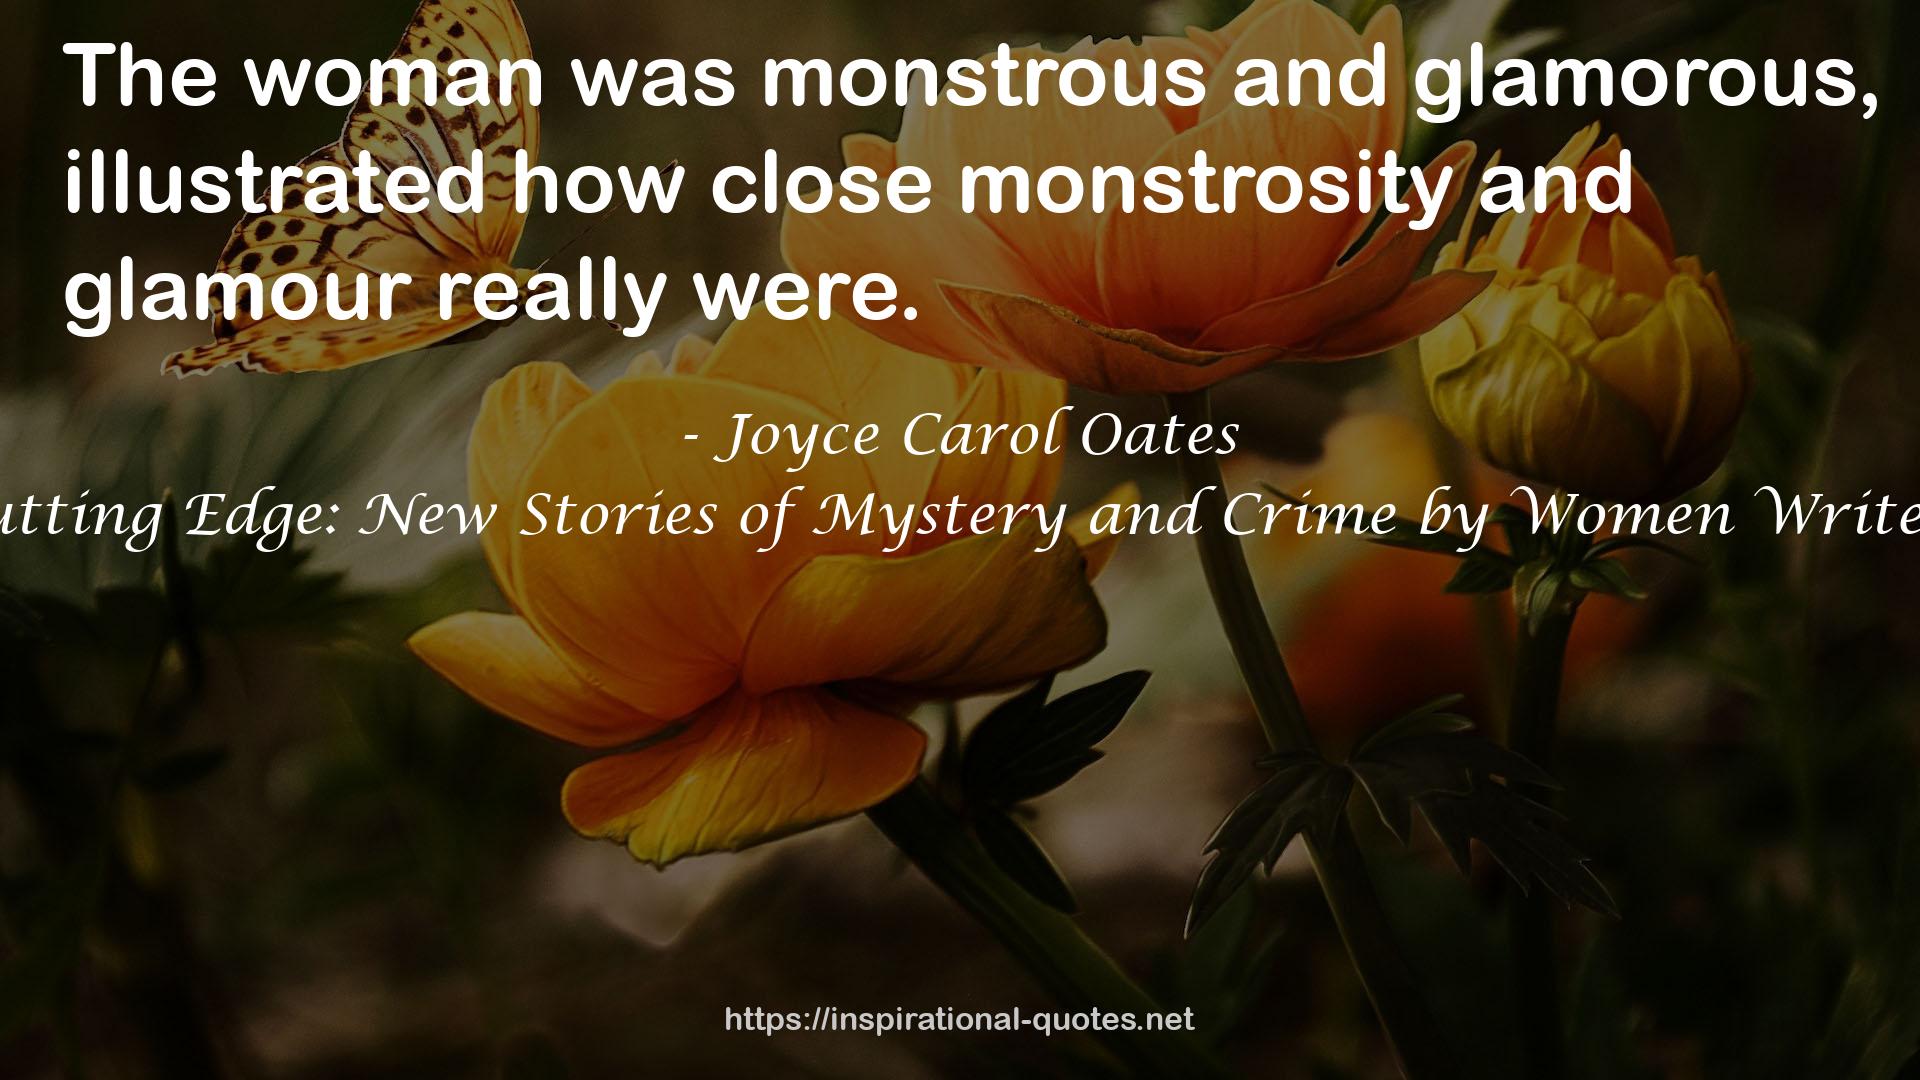 Cutting Edge: New Stories of Mystery and Crime by Women Writers QUOTES